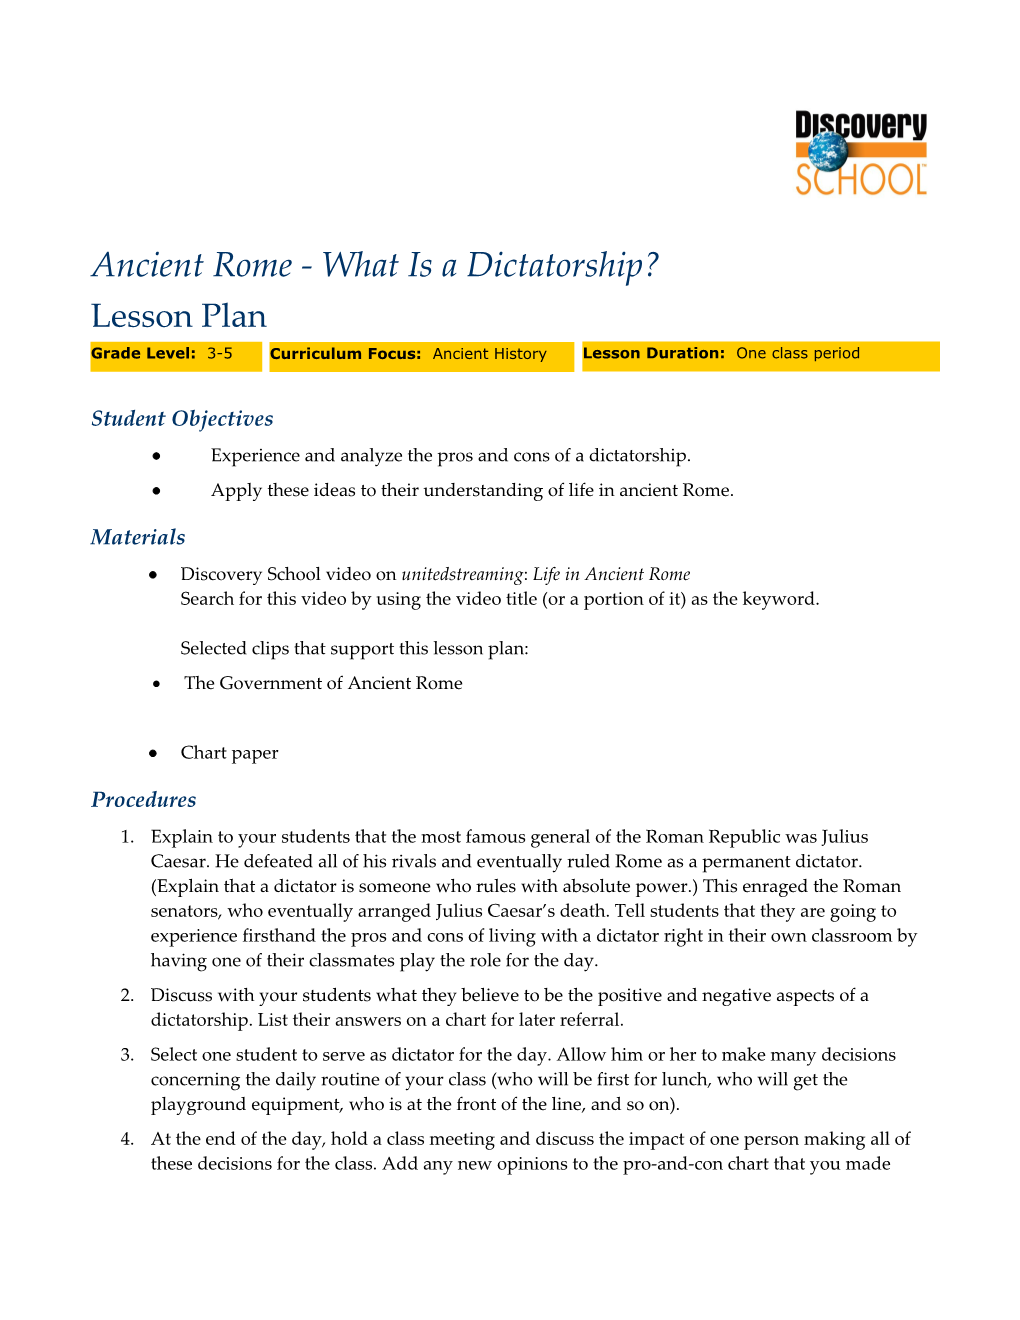 Ancient Rome - What Is a Dictatorship?